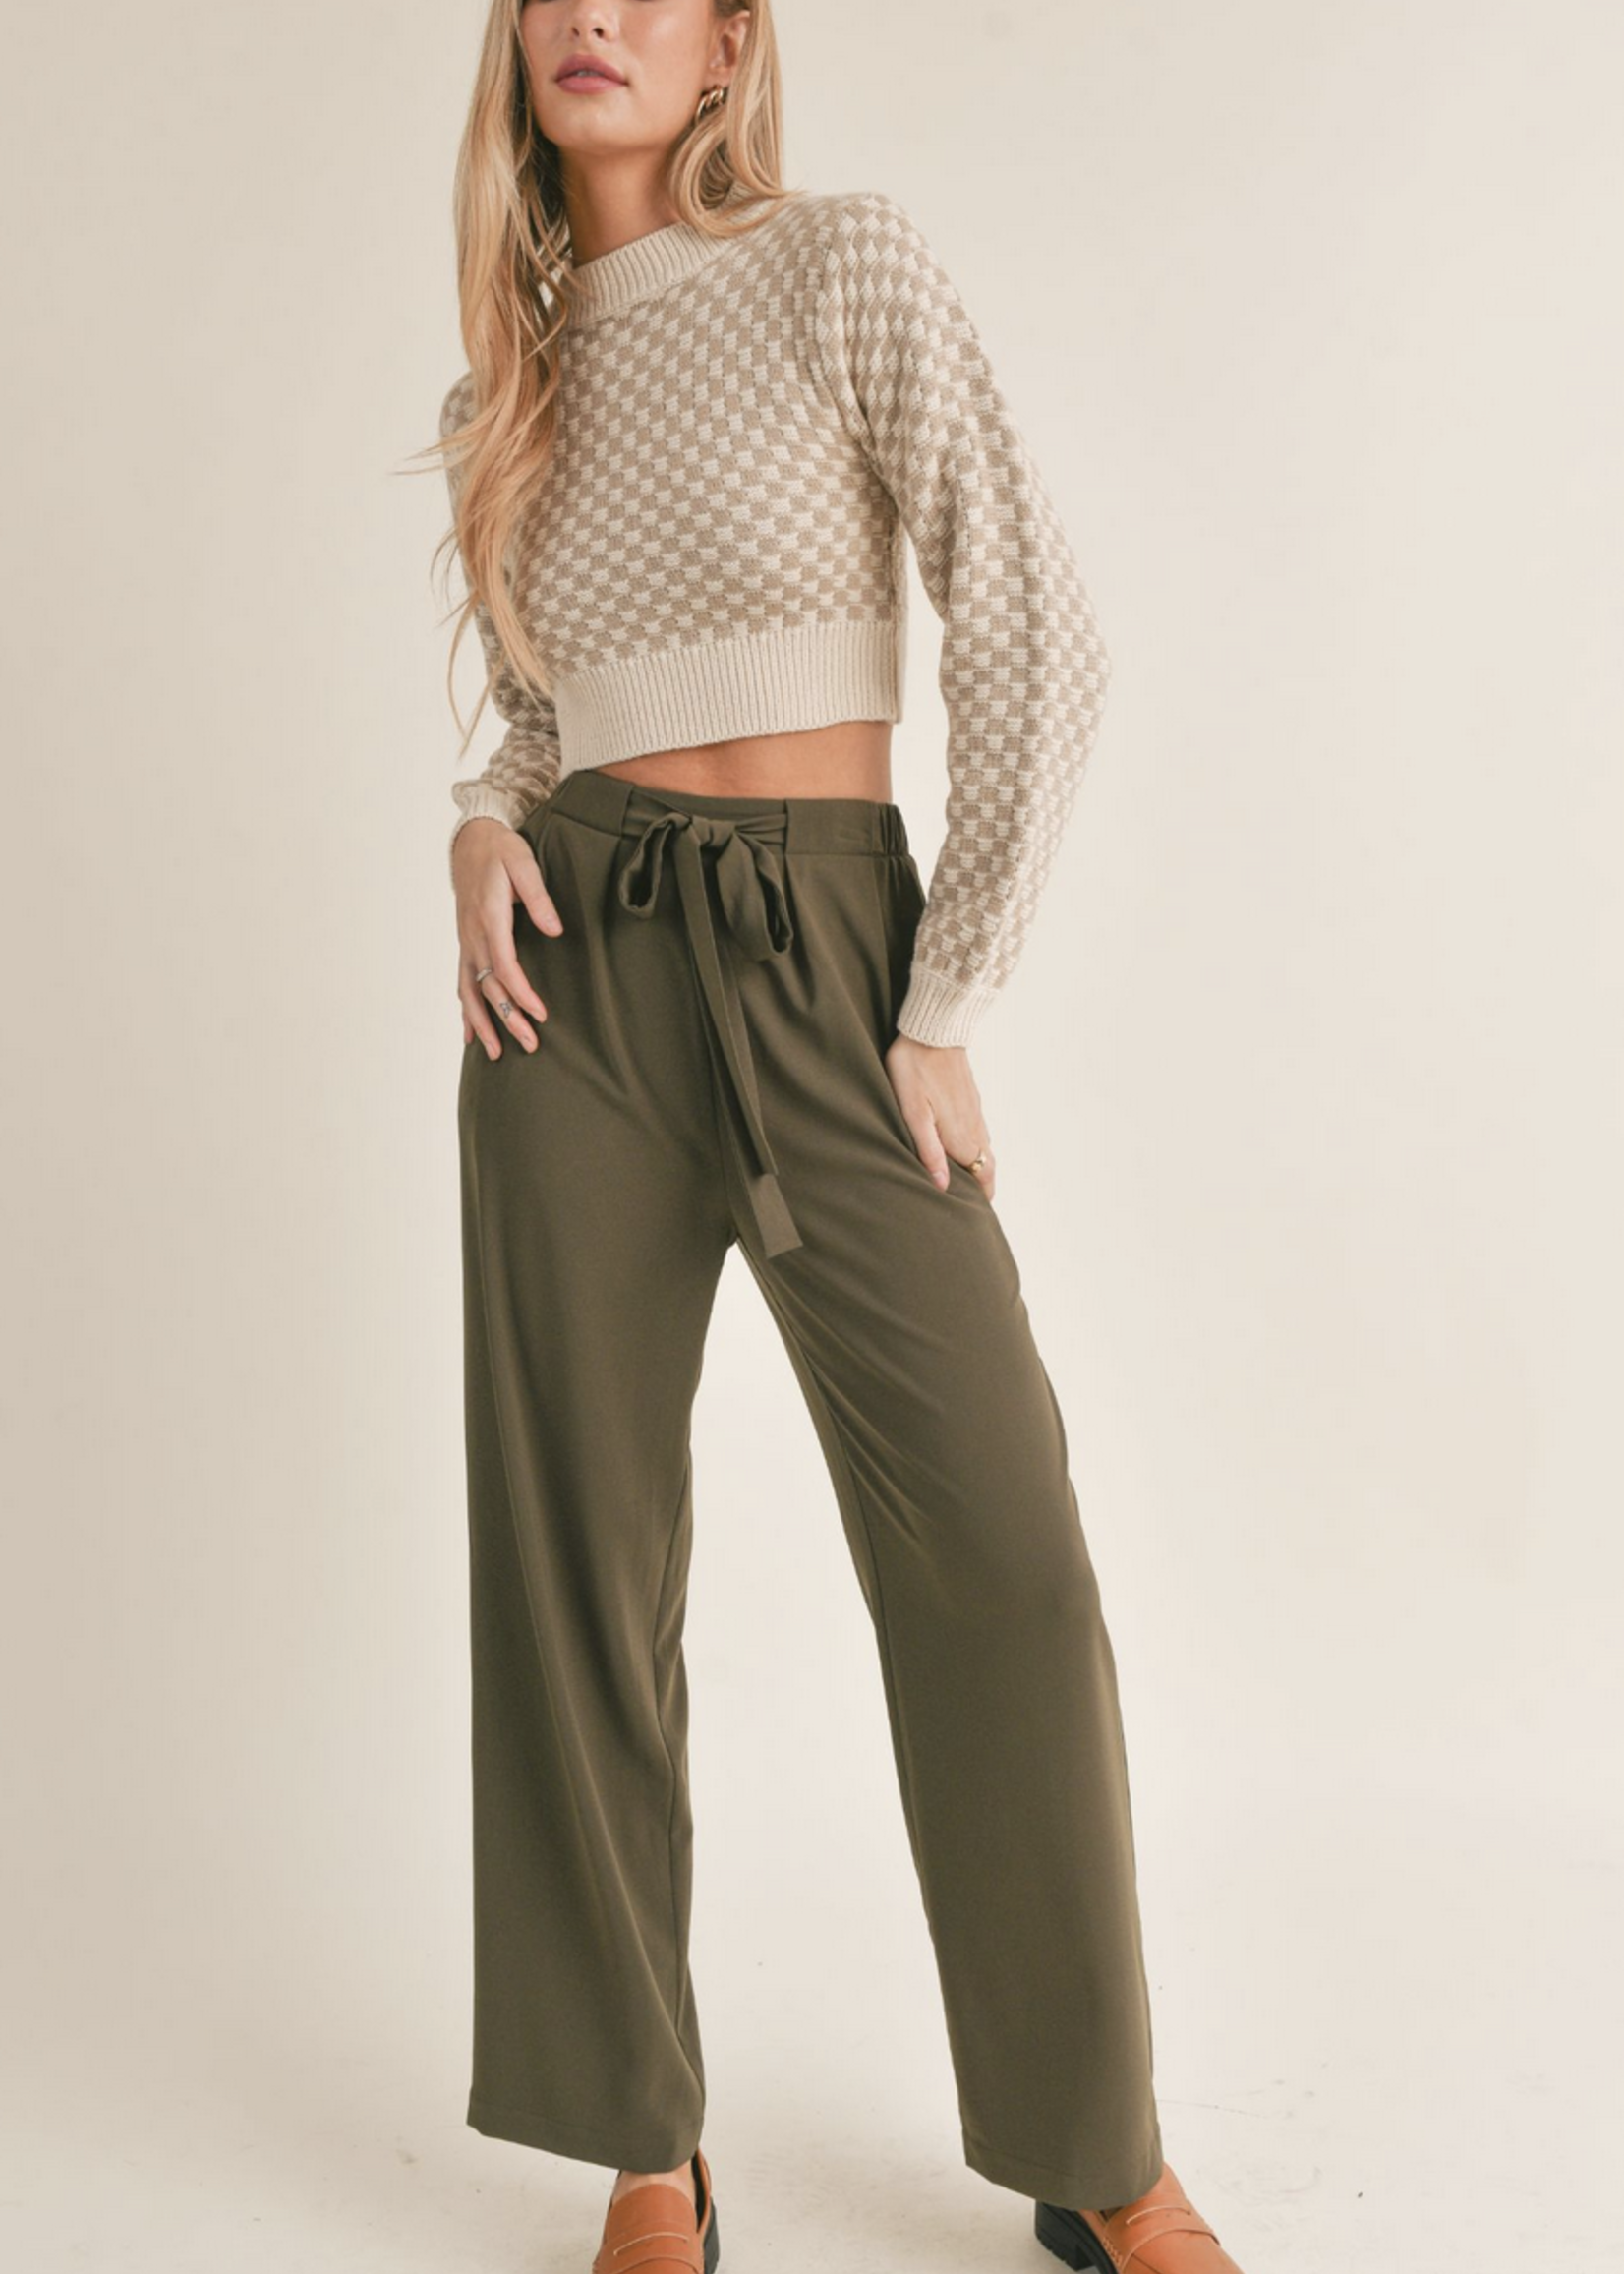 SAGE THE LABEL GREAT THINGS GINGHAM CROP SWEATER